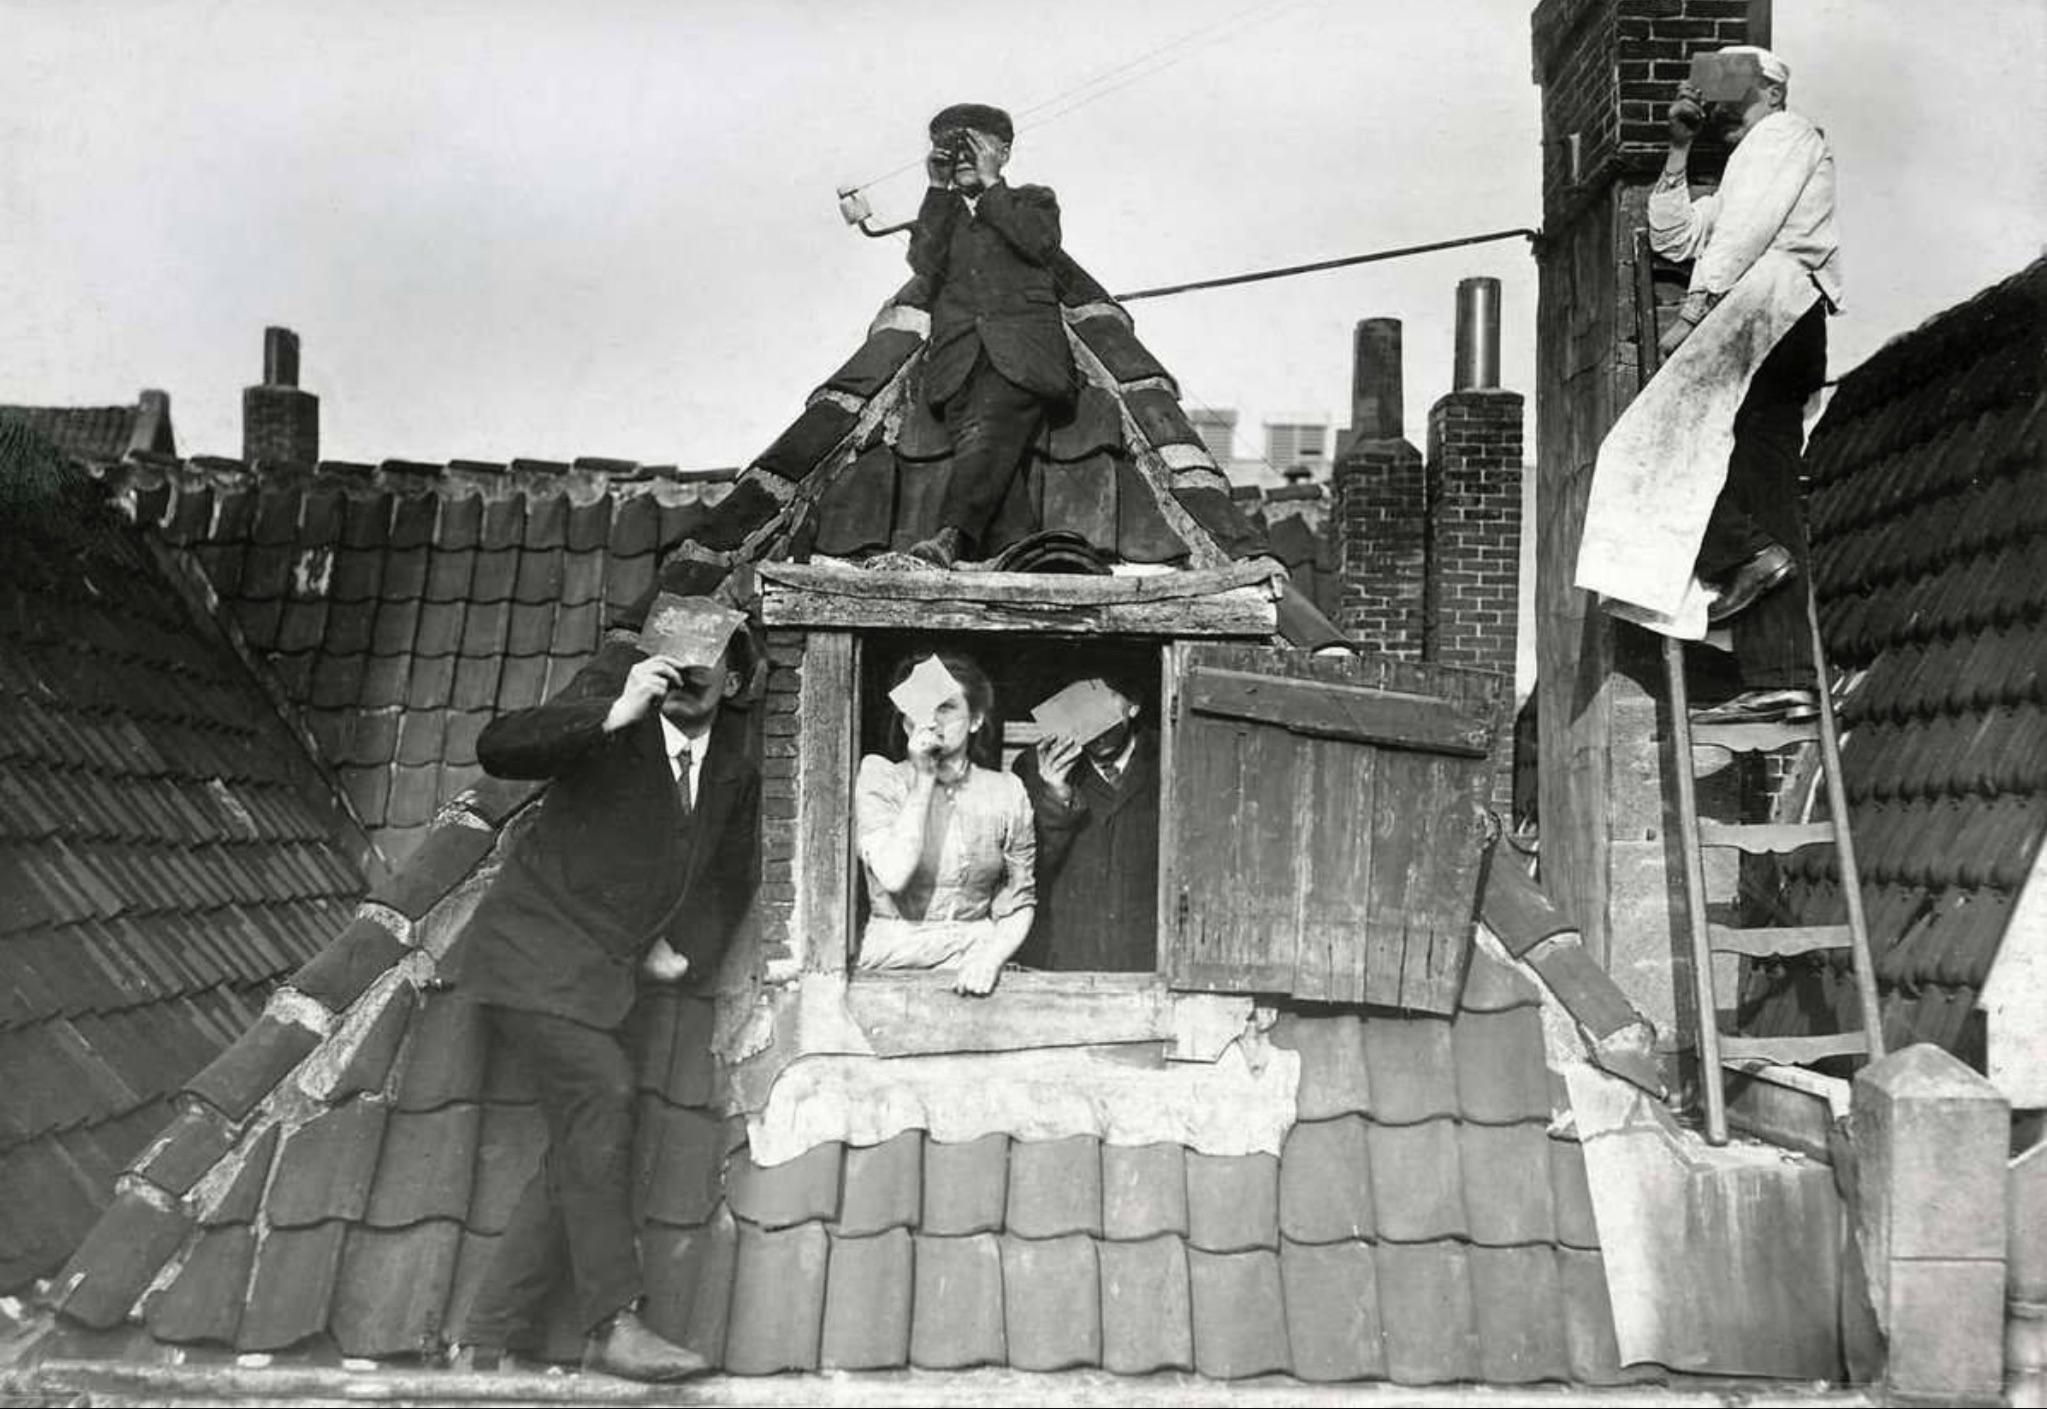 Watching a solar eclipse from a rooftop in Rotterdam, Netherlands, April 17, 1912.jpg